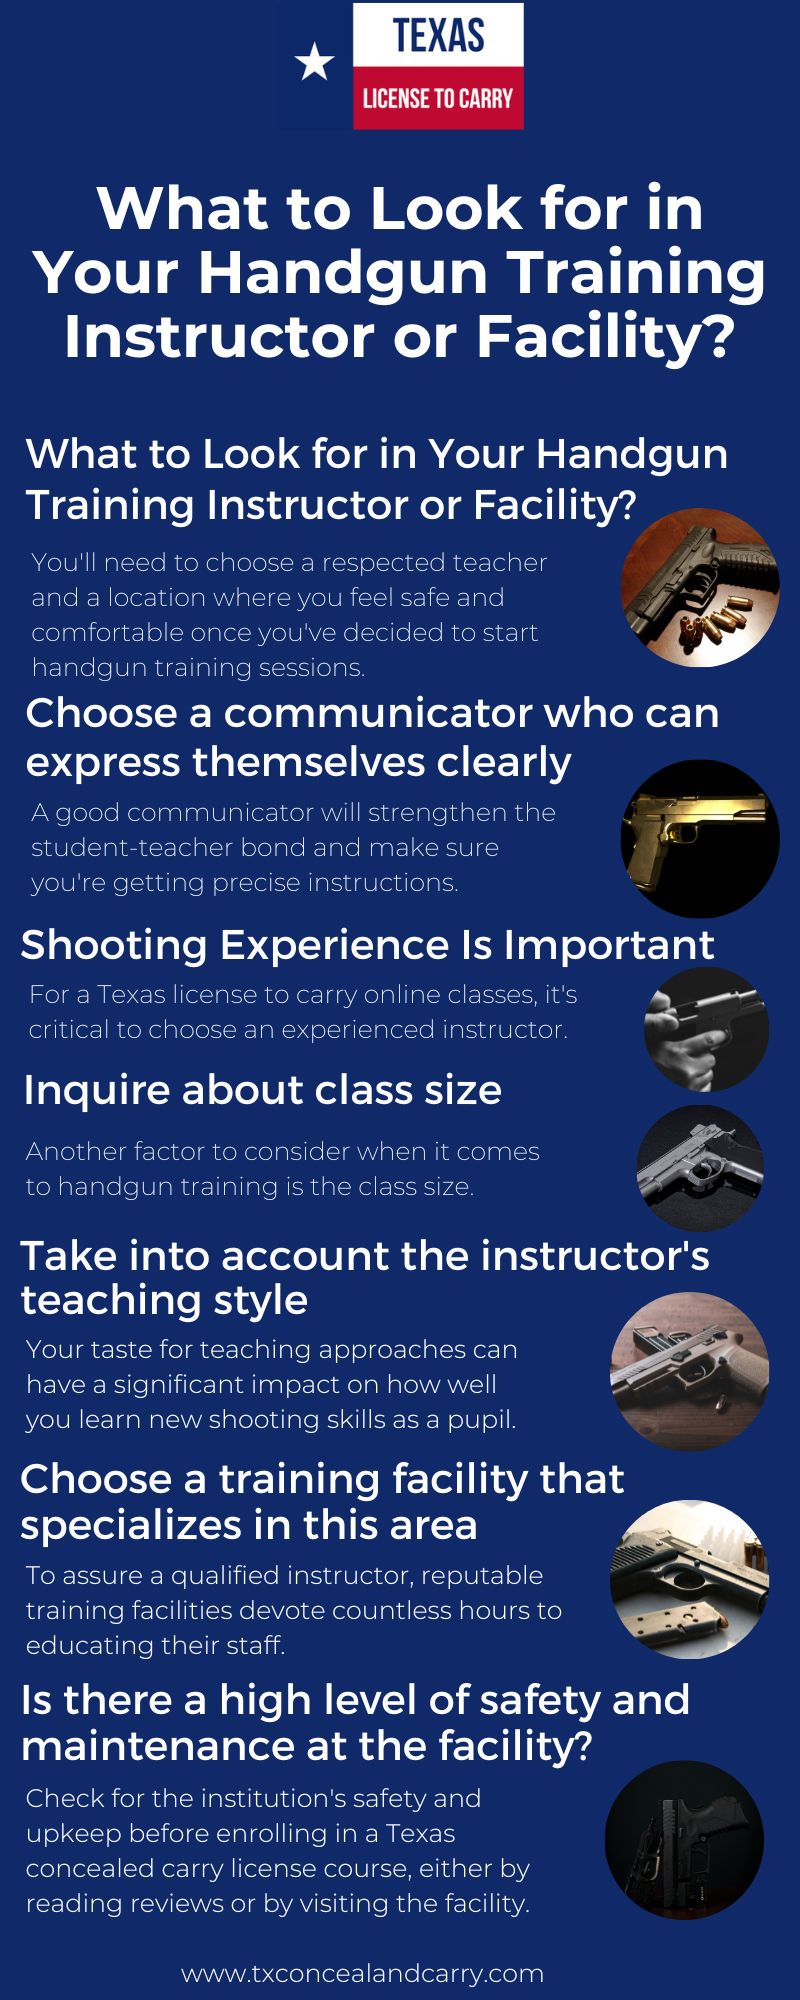 What to Look for in Your Handgun Training Instructor or Facility?